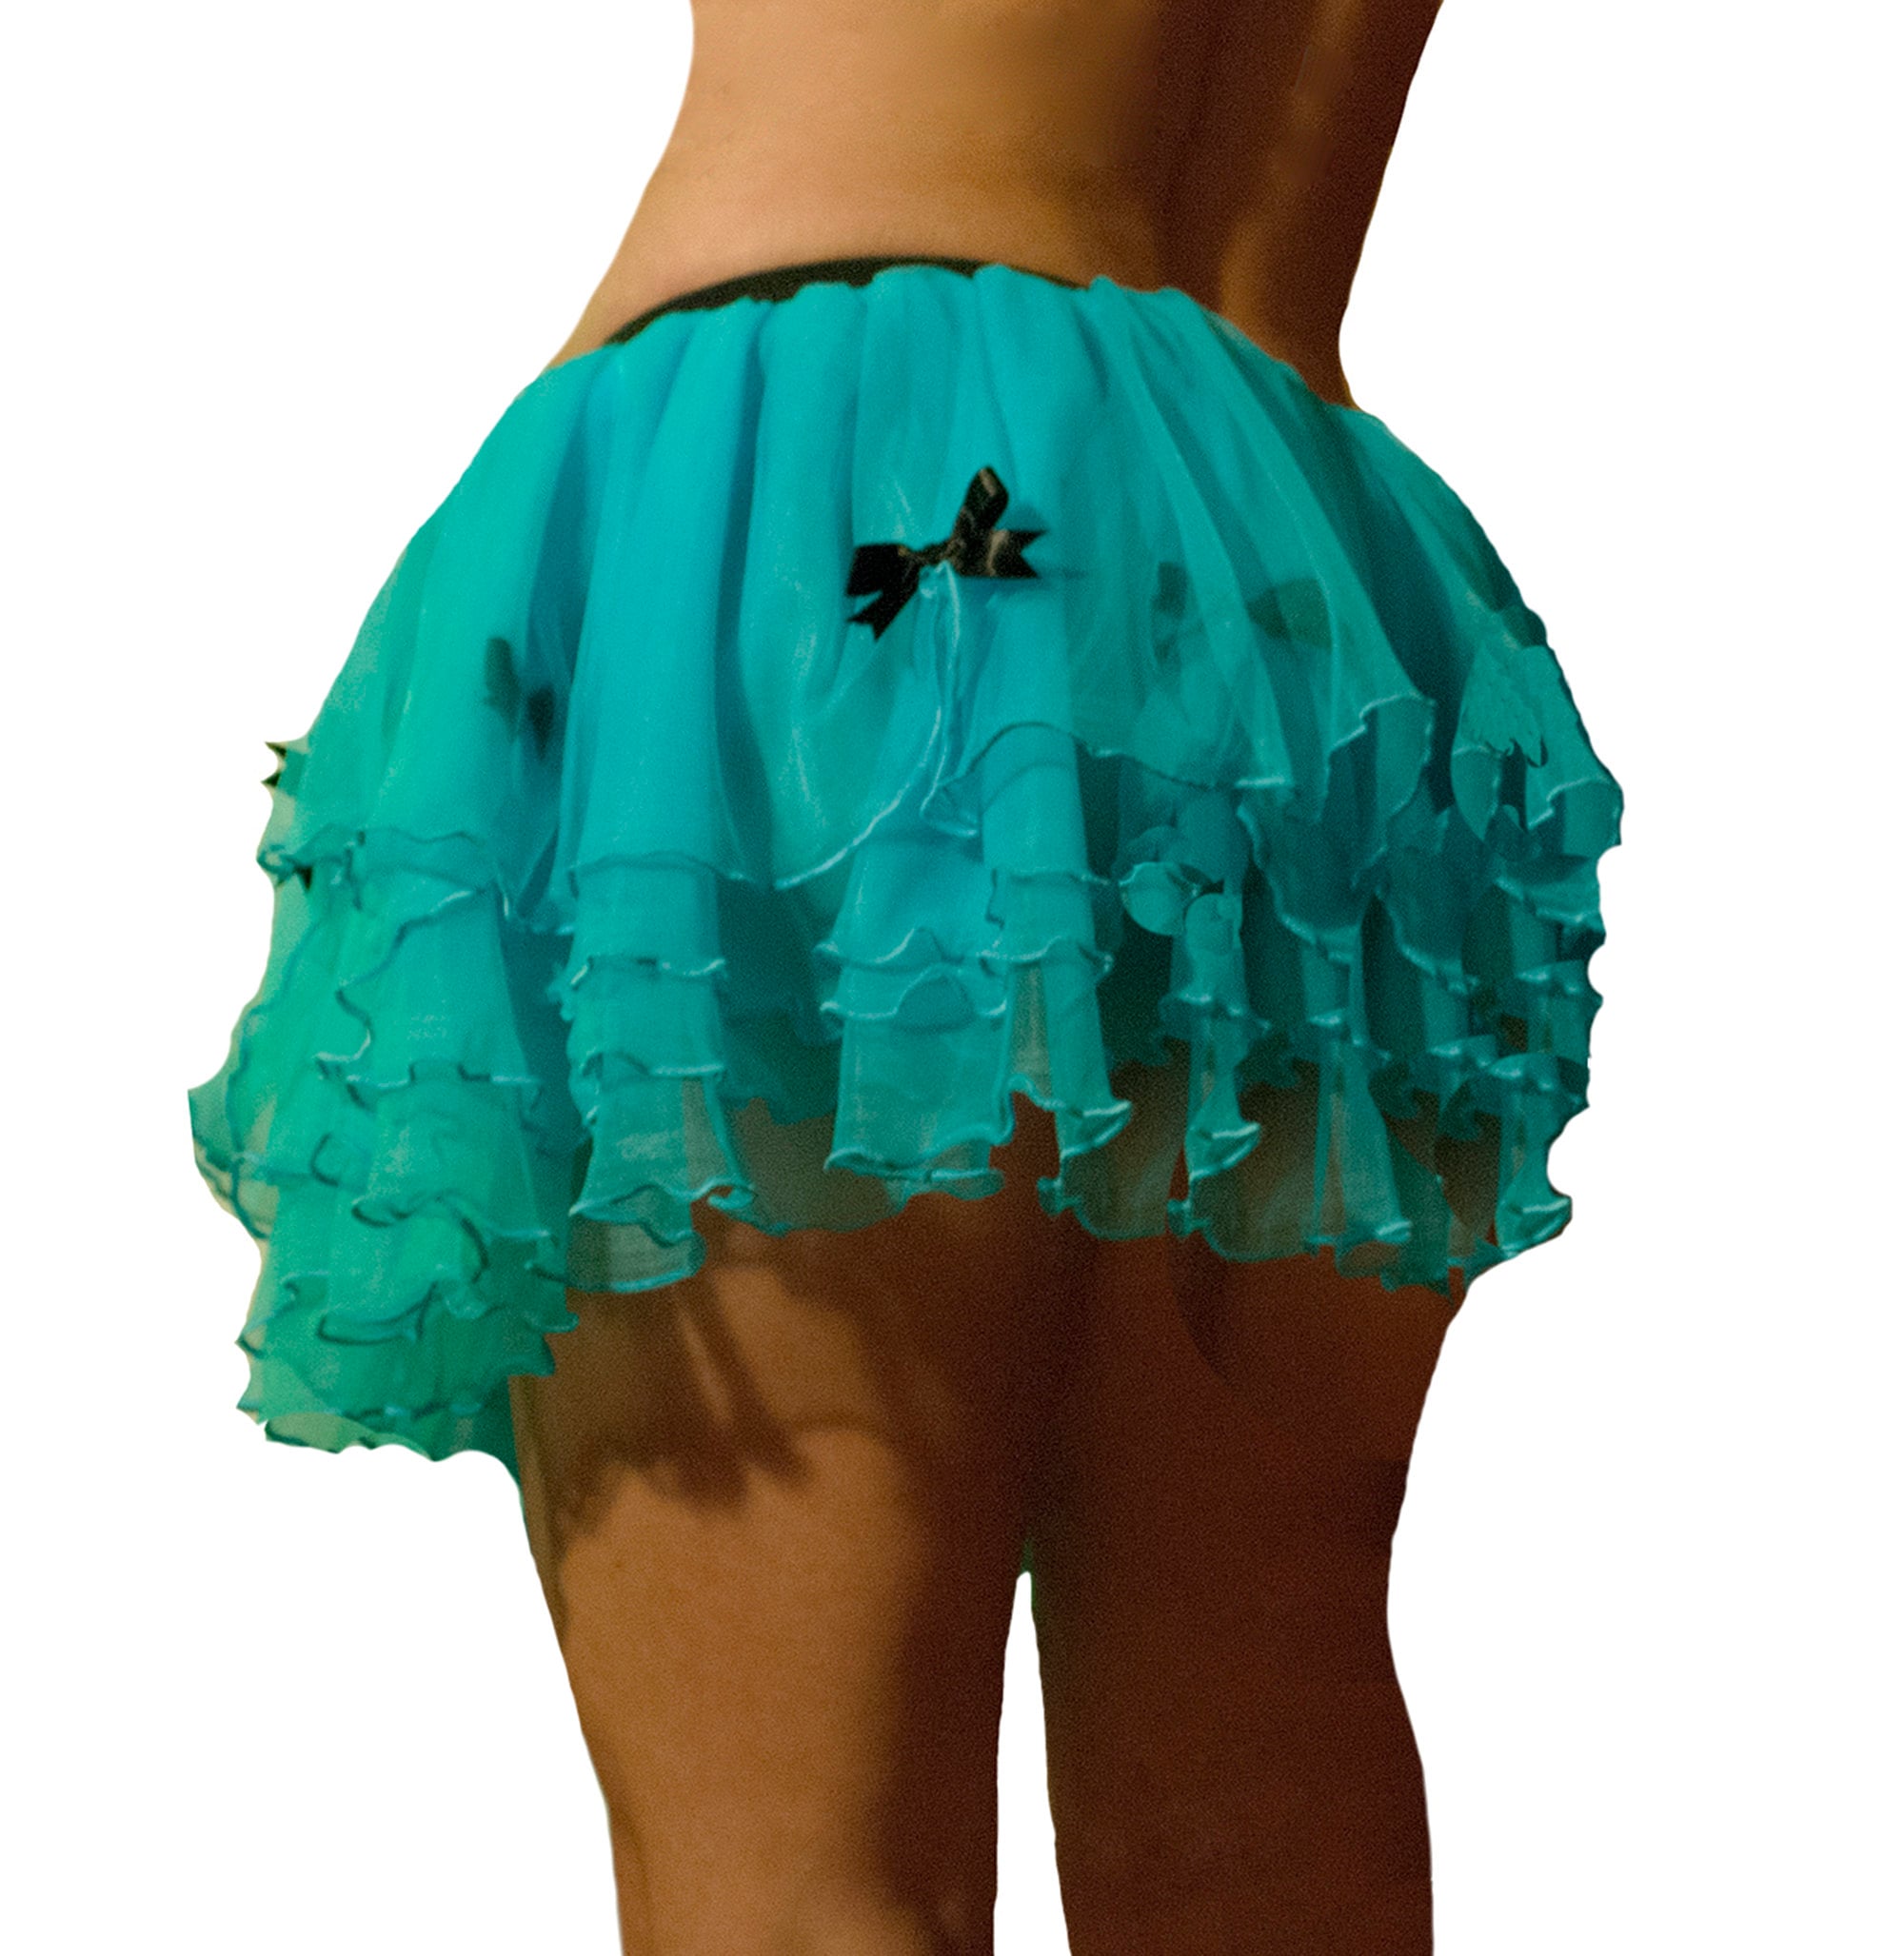 Adults Teens Girl Tutu Ballet Skirt Layer Tulle Costume Fairy Party Hens Night 